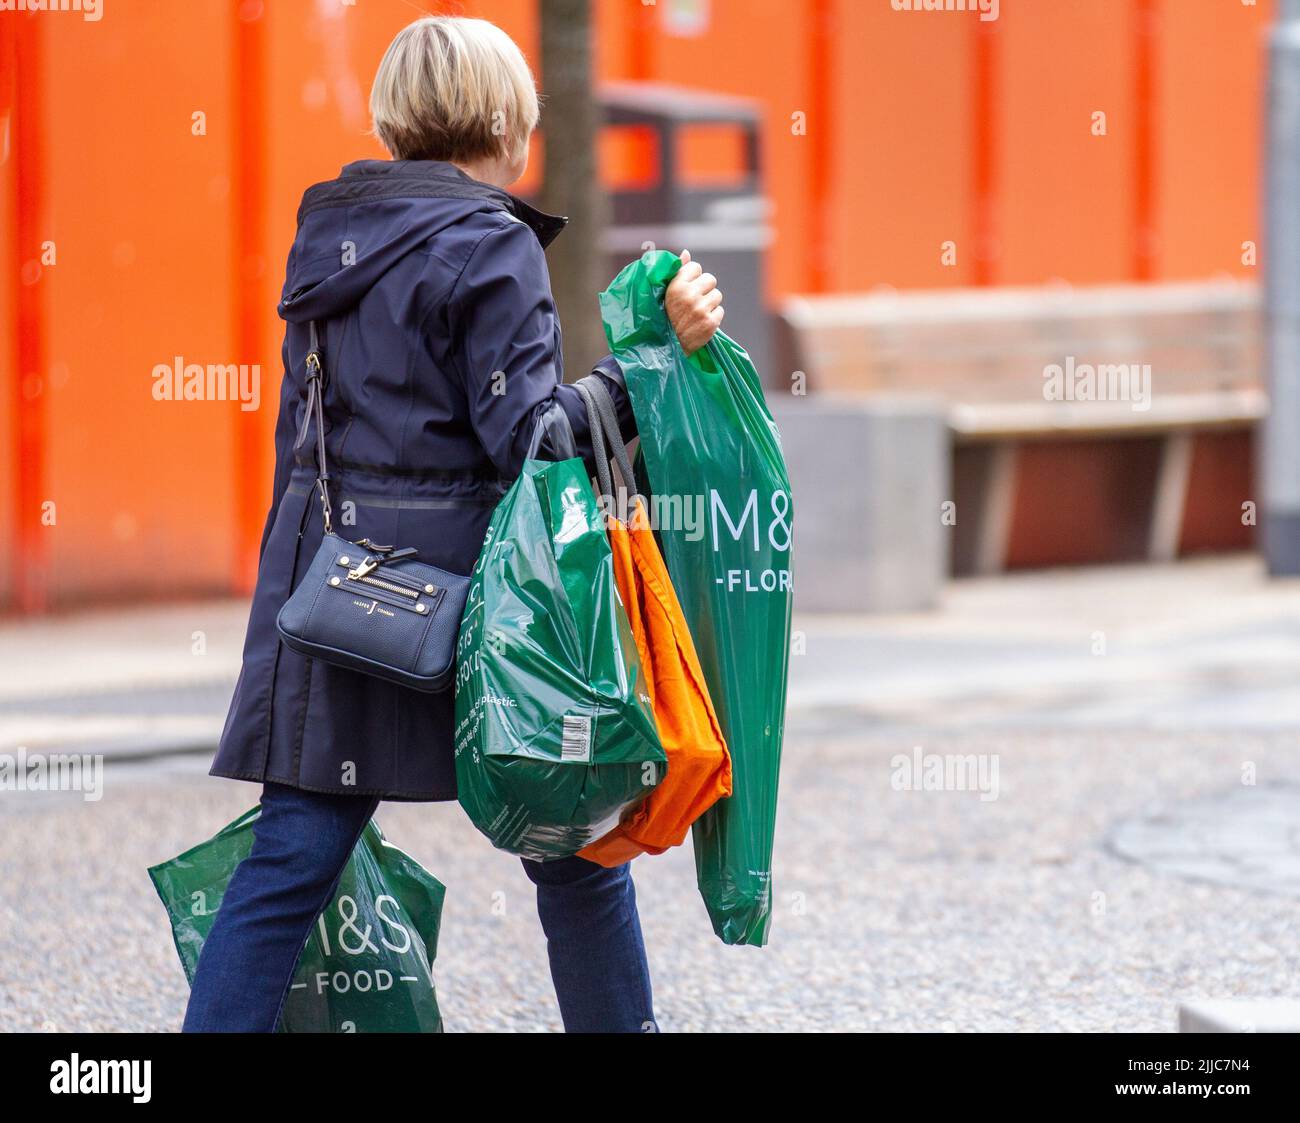 ‘M&S’, Marks and Spencer Lorry, retail business store delivery, marks and spencer, Preston, UK Stock Photo